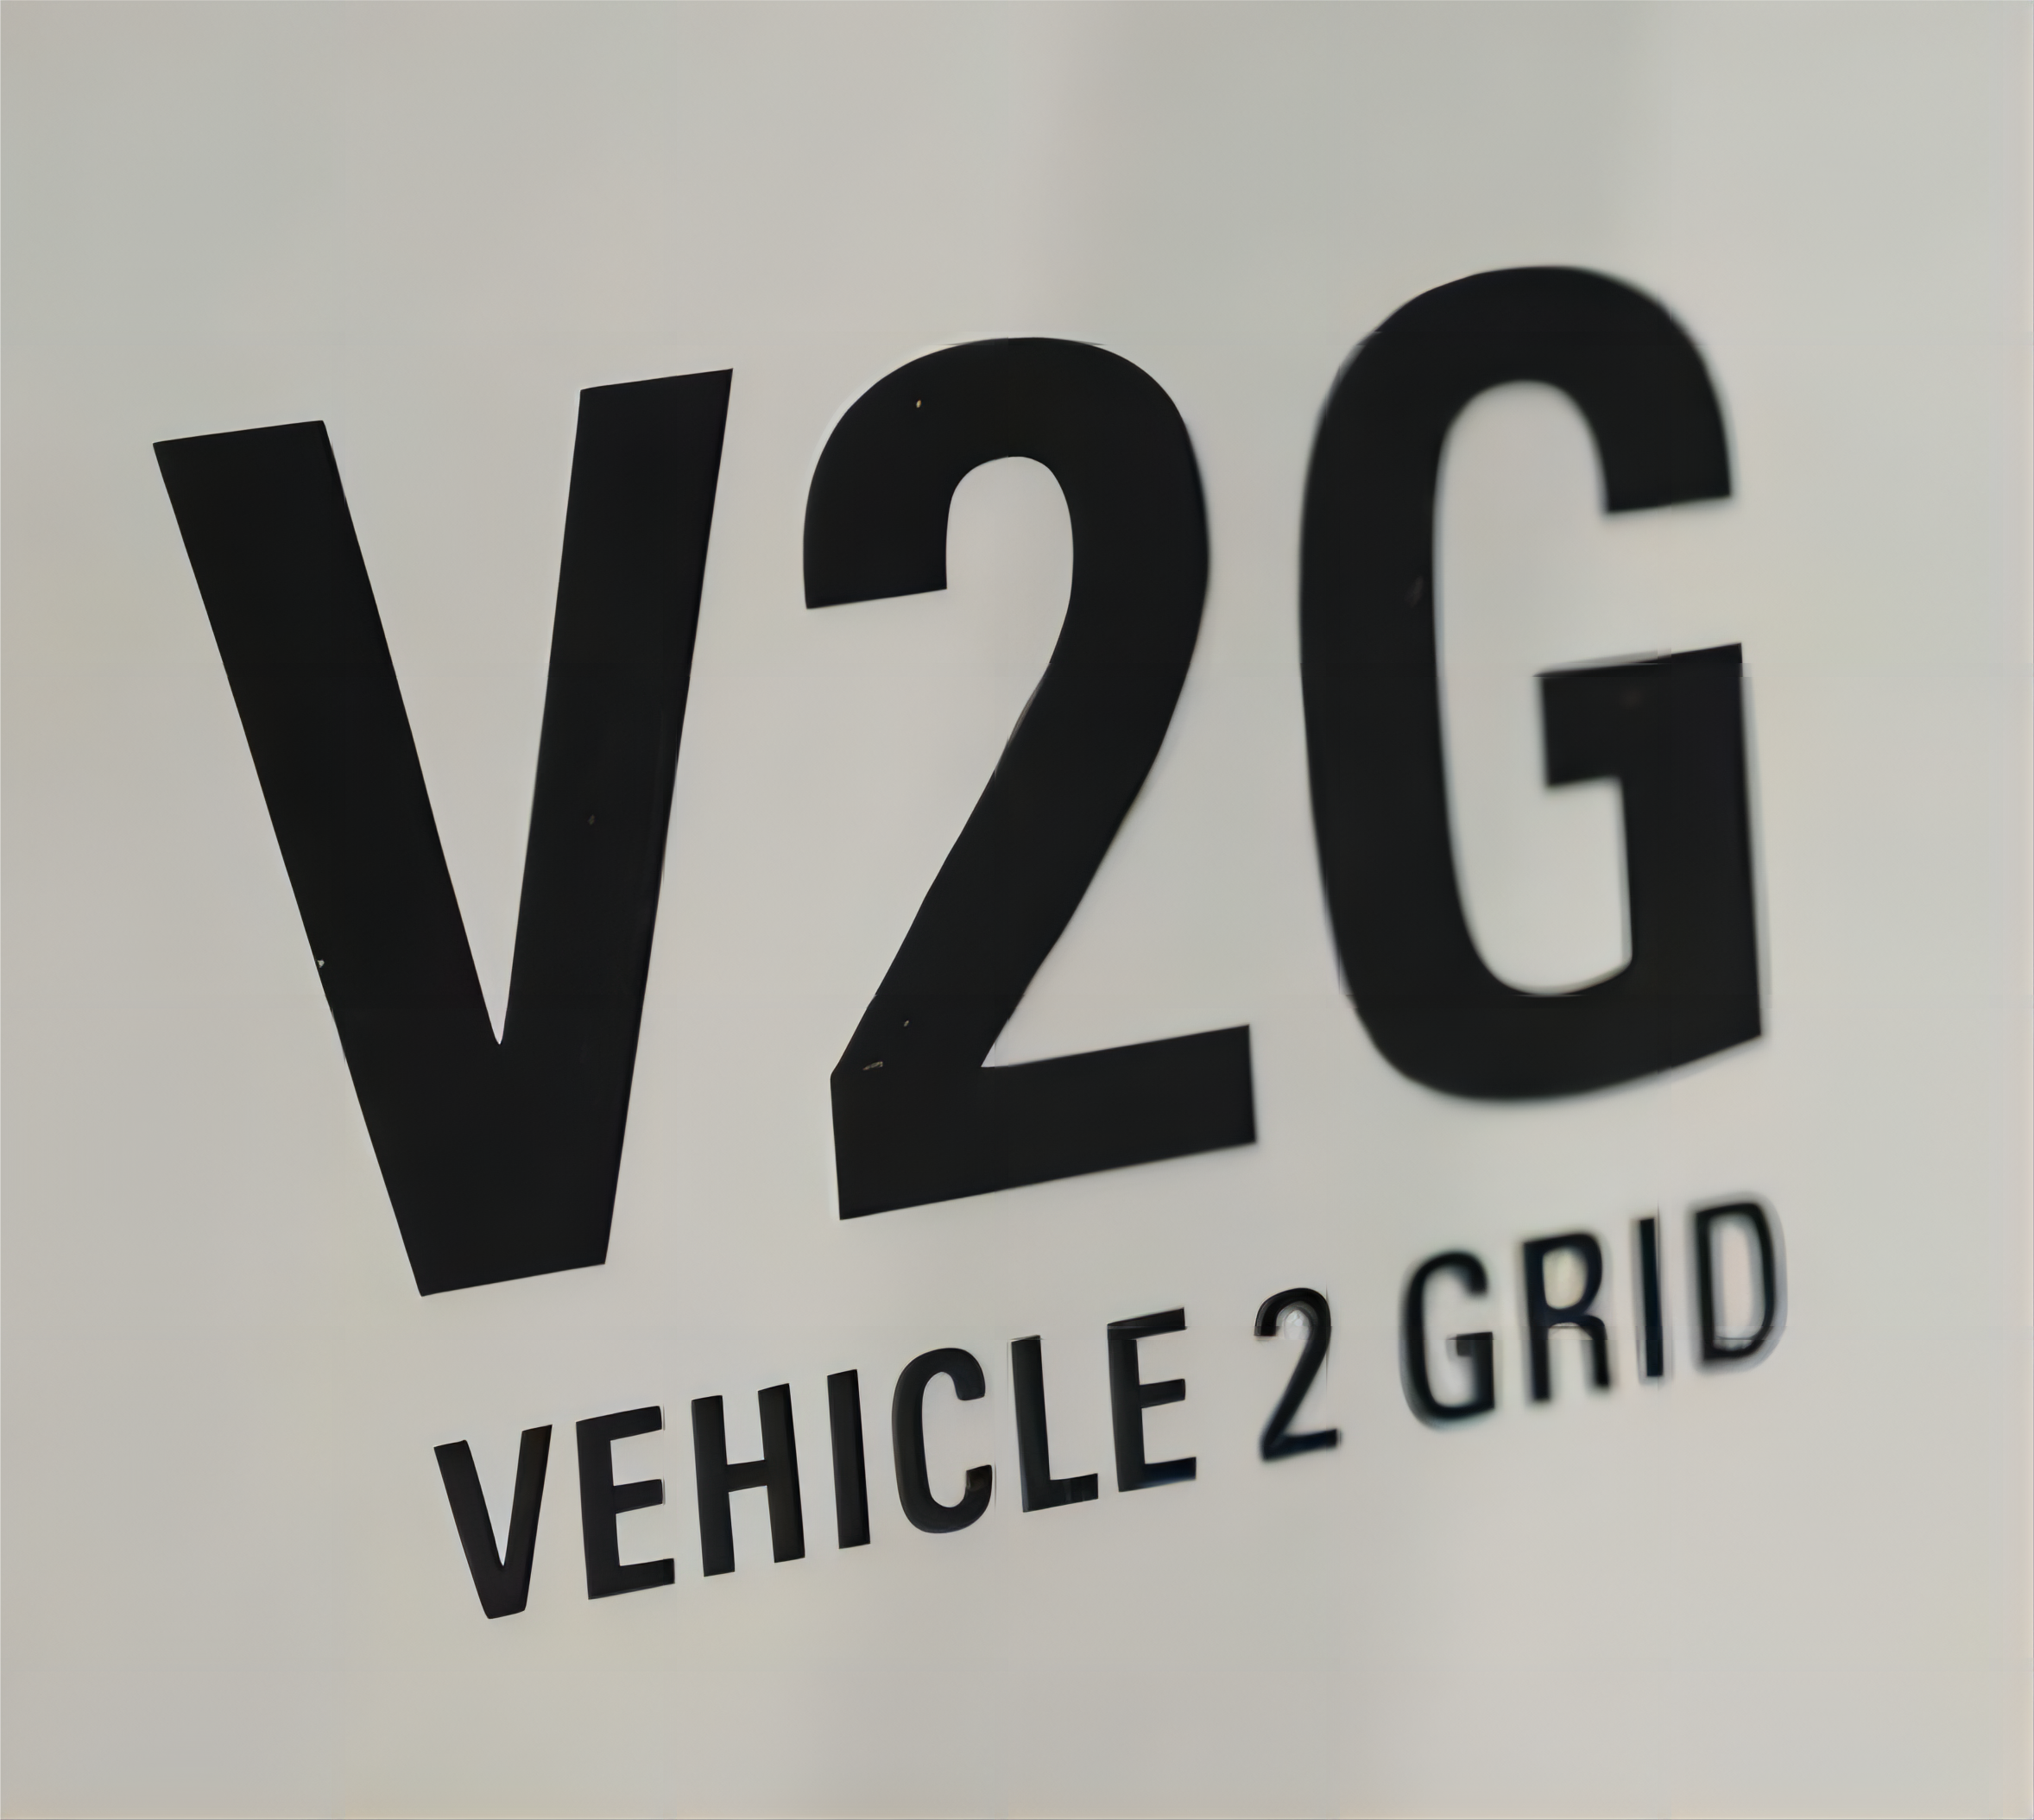 V2G Chargers: The Future Link Between Vehicles and the Grid